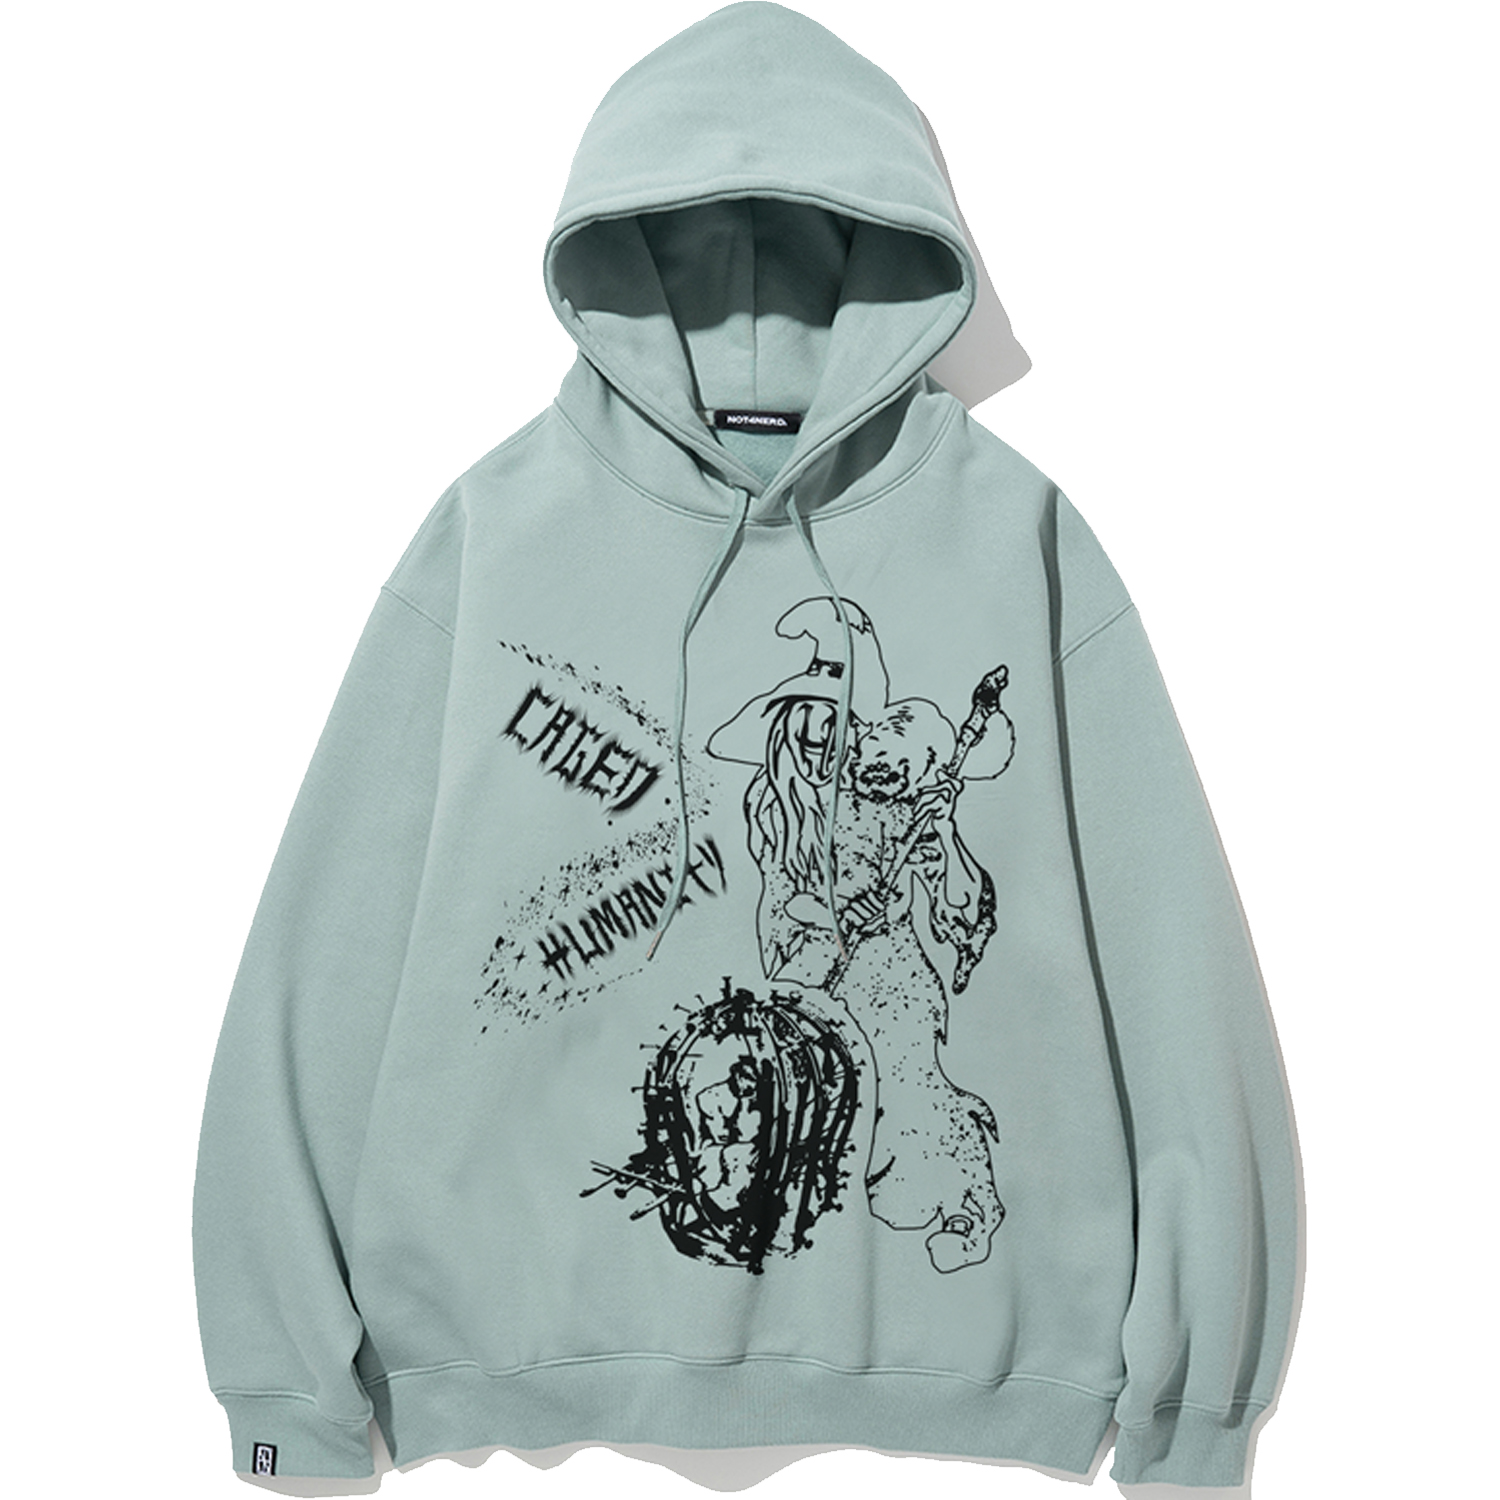 Caged Humanity Pullover Hood - Emerald,NOT4NERD